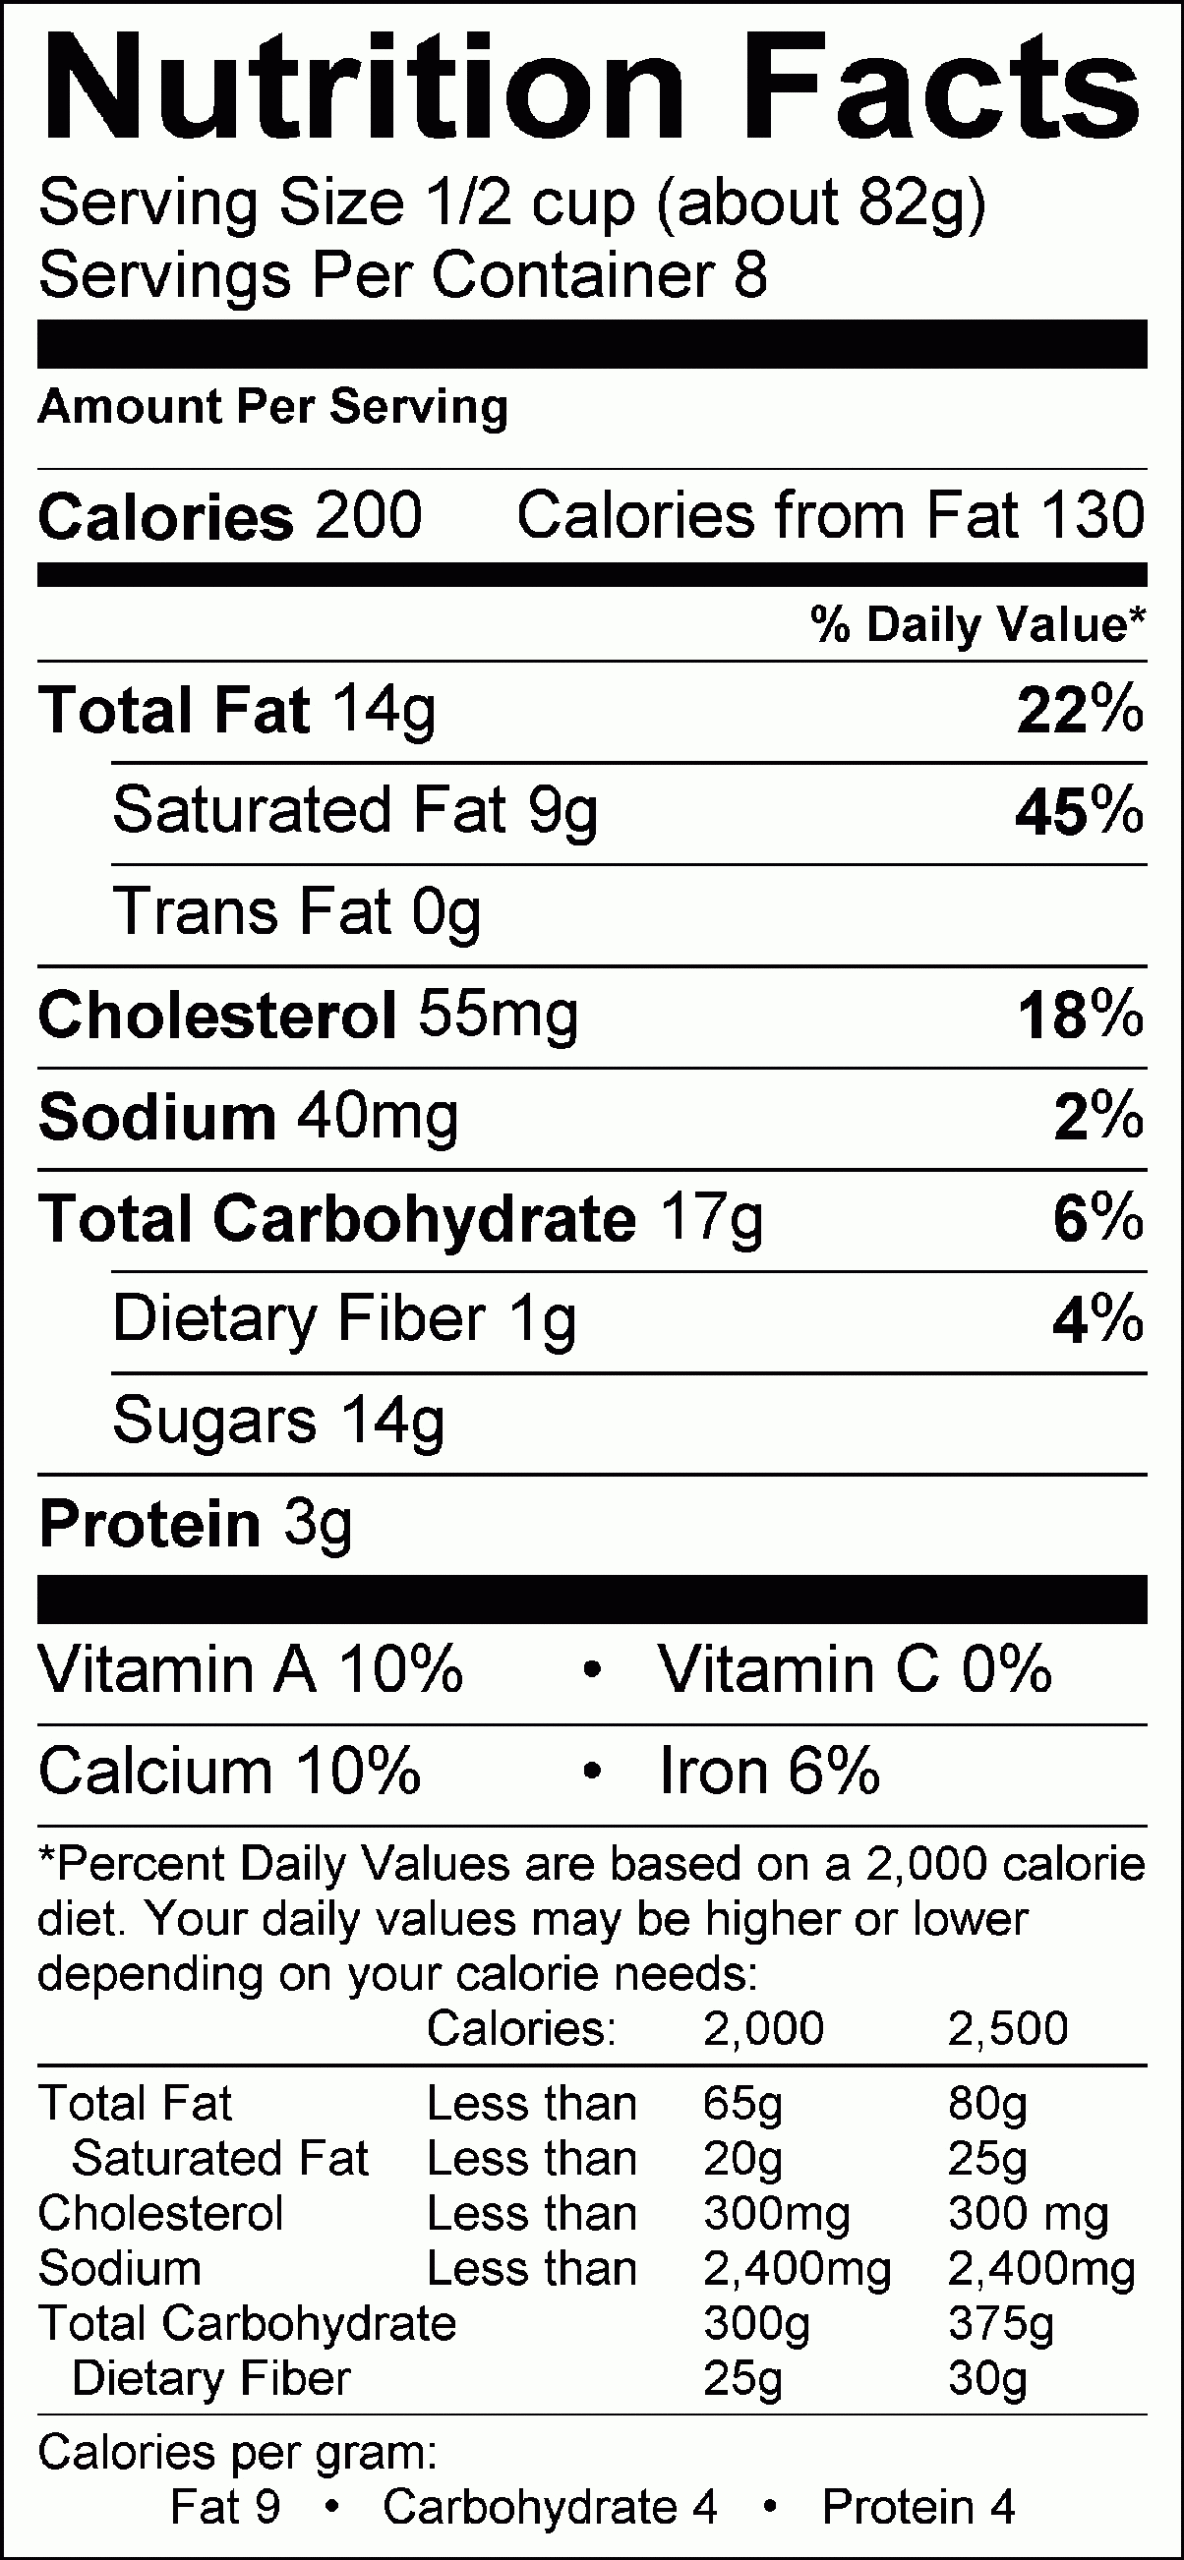 Nutrition Facts Table Using Html & Css – Codemyui Throughout Nutrition Label Template Word